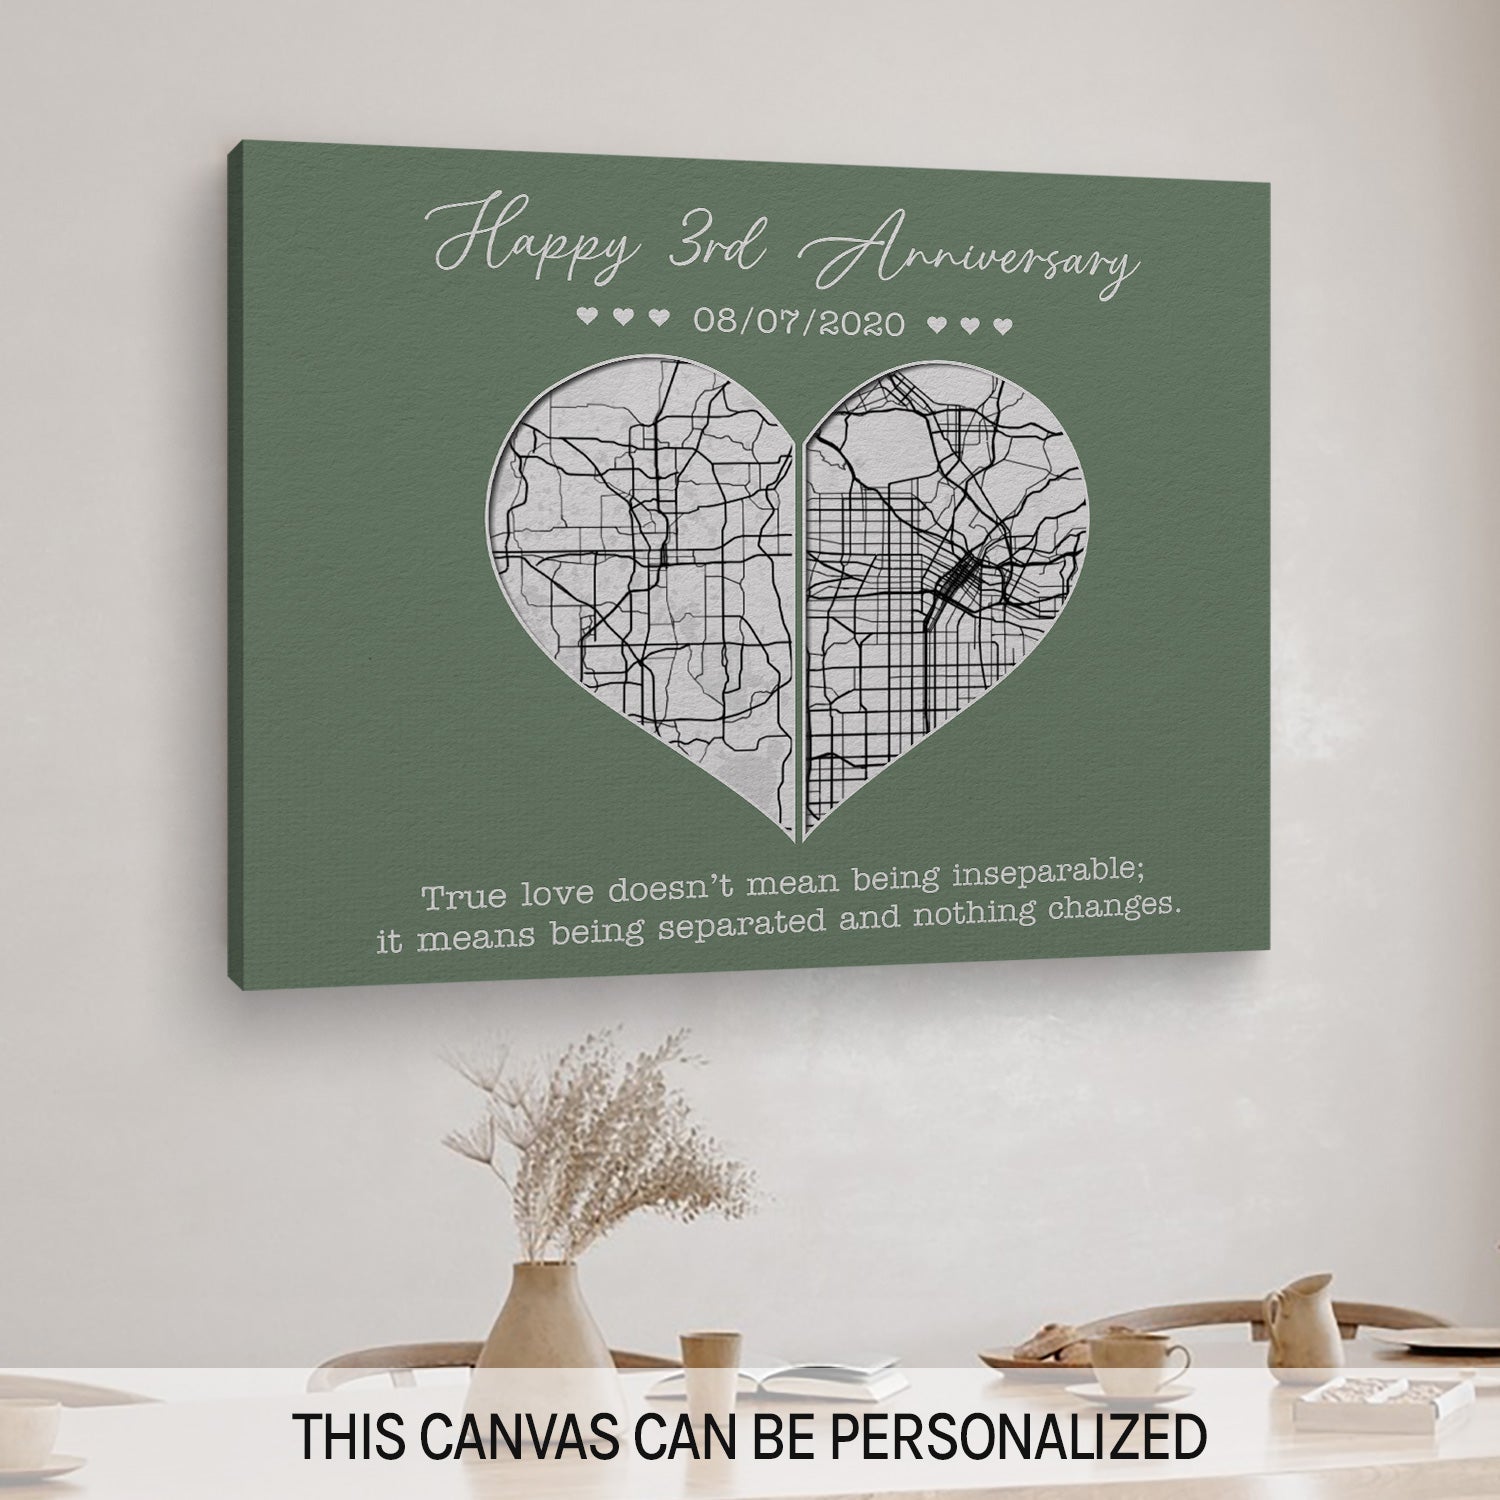 Three Year Anniversary True Love Doesn't Mean Being Inseparable - Personalized 3 Year Anniversary gift for him for her - Custom Canvas - MyMindfulGifts